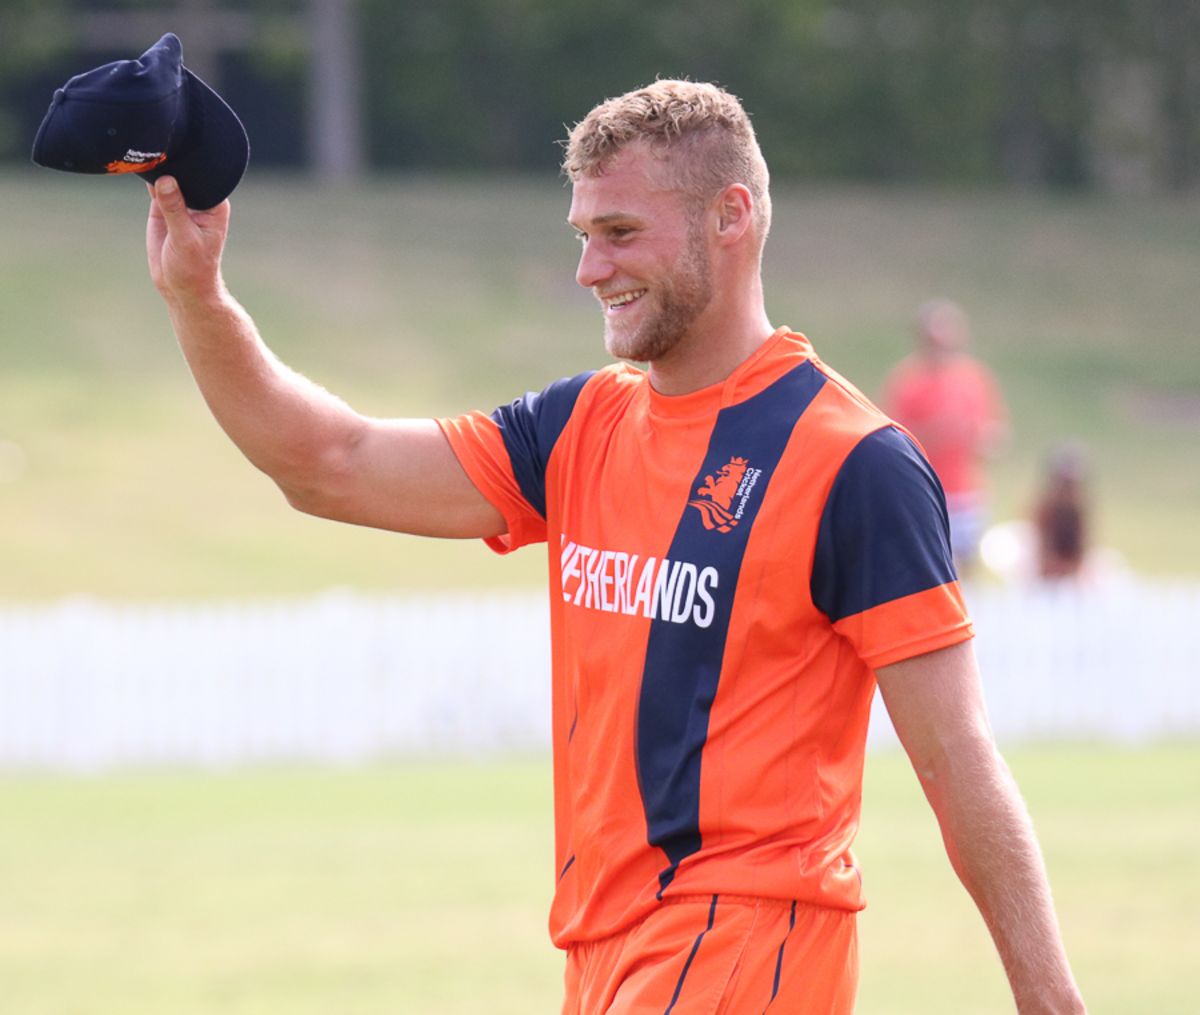 Netherlands fast bowler Vivian Kingma was on Wednesday suspended by the International Cricket Council (ICC) for four ODIs/T20Is for ball-tampering during the third match of the Men’s Cricket World Cup Super League series against Afghanistan in Doha.